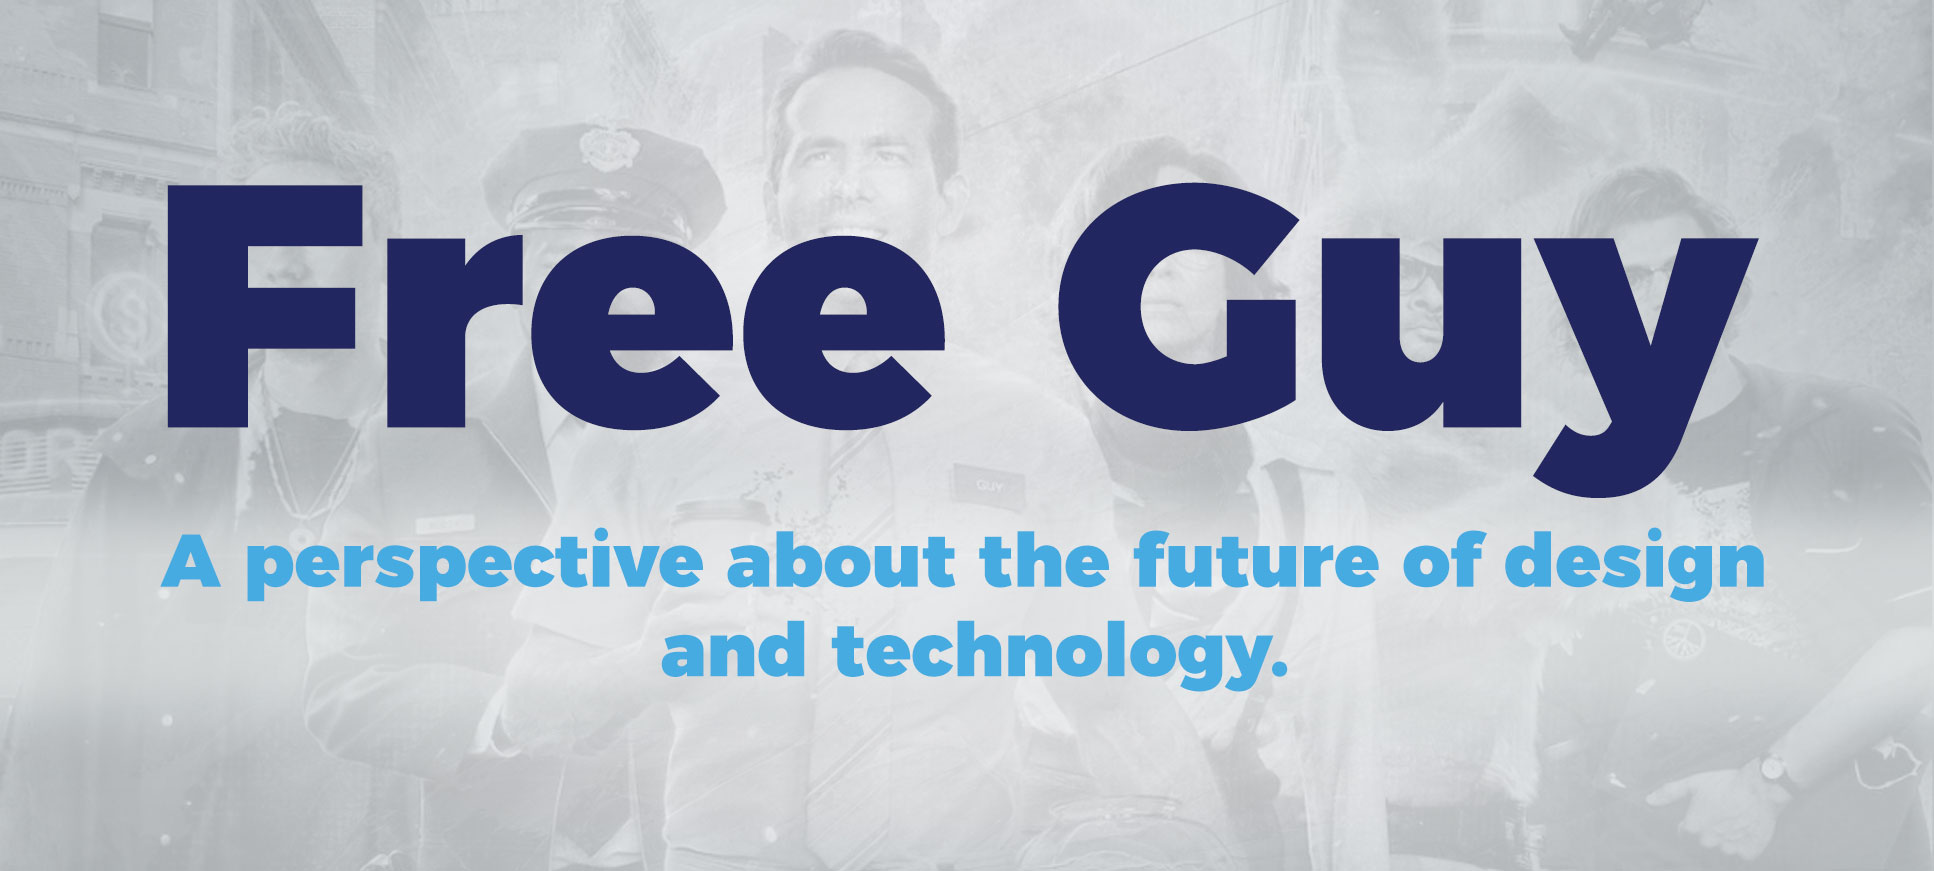 Free guy: A perspective about the future of design and technology